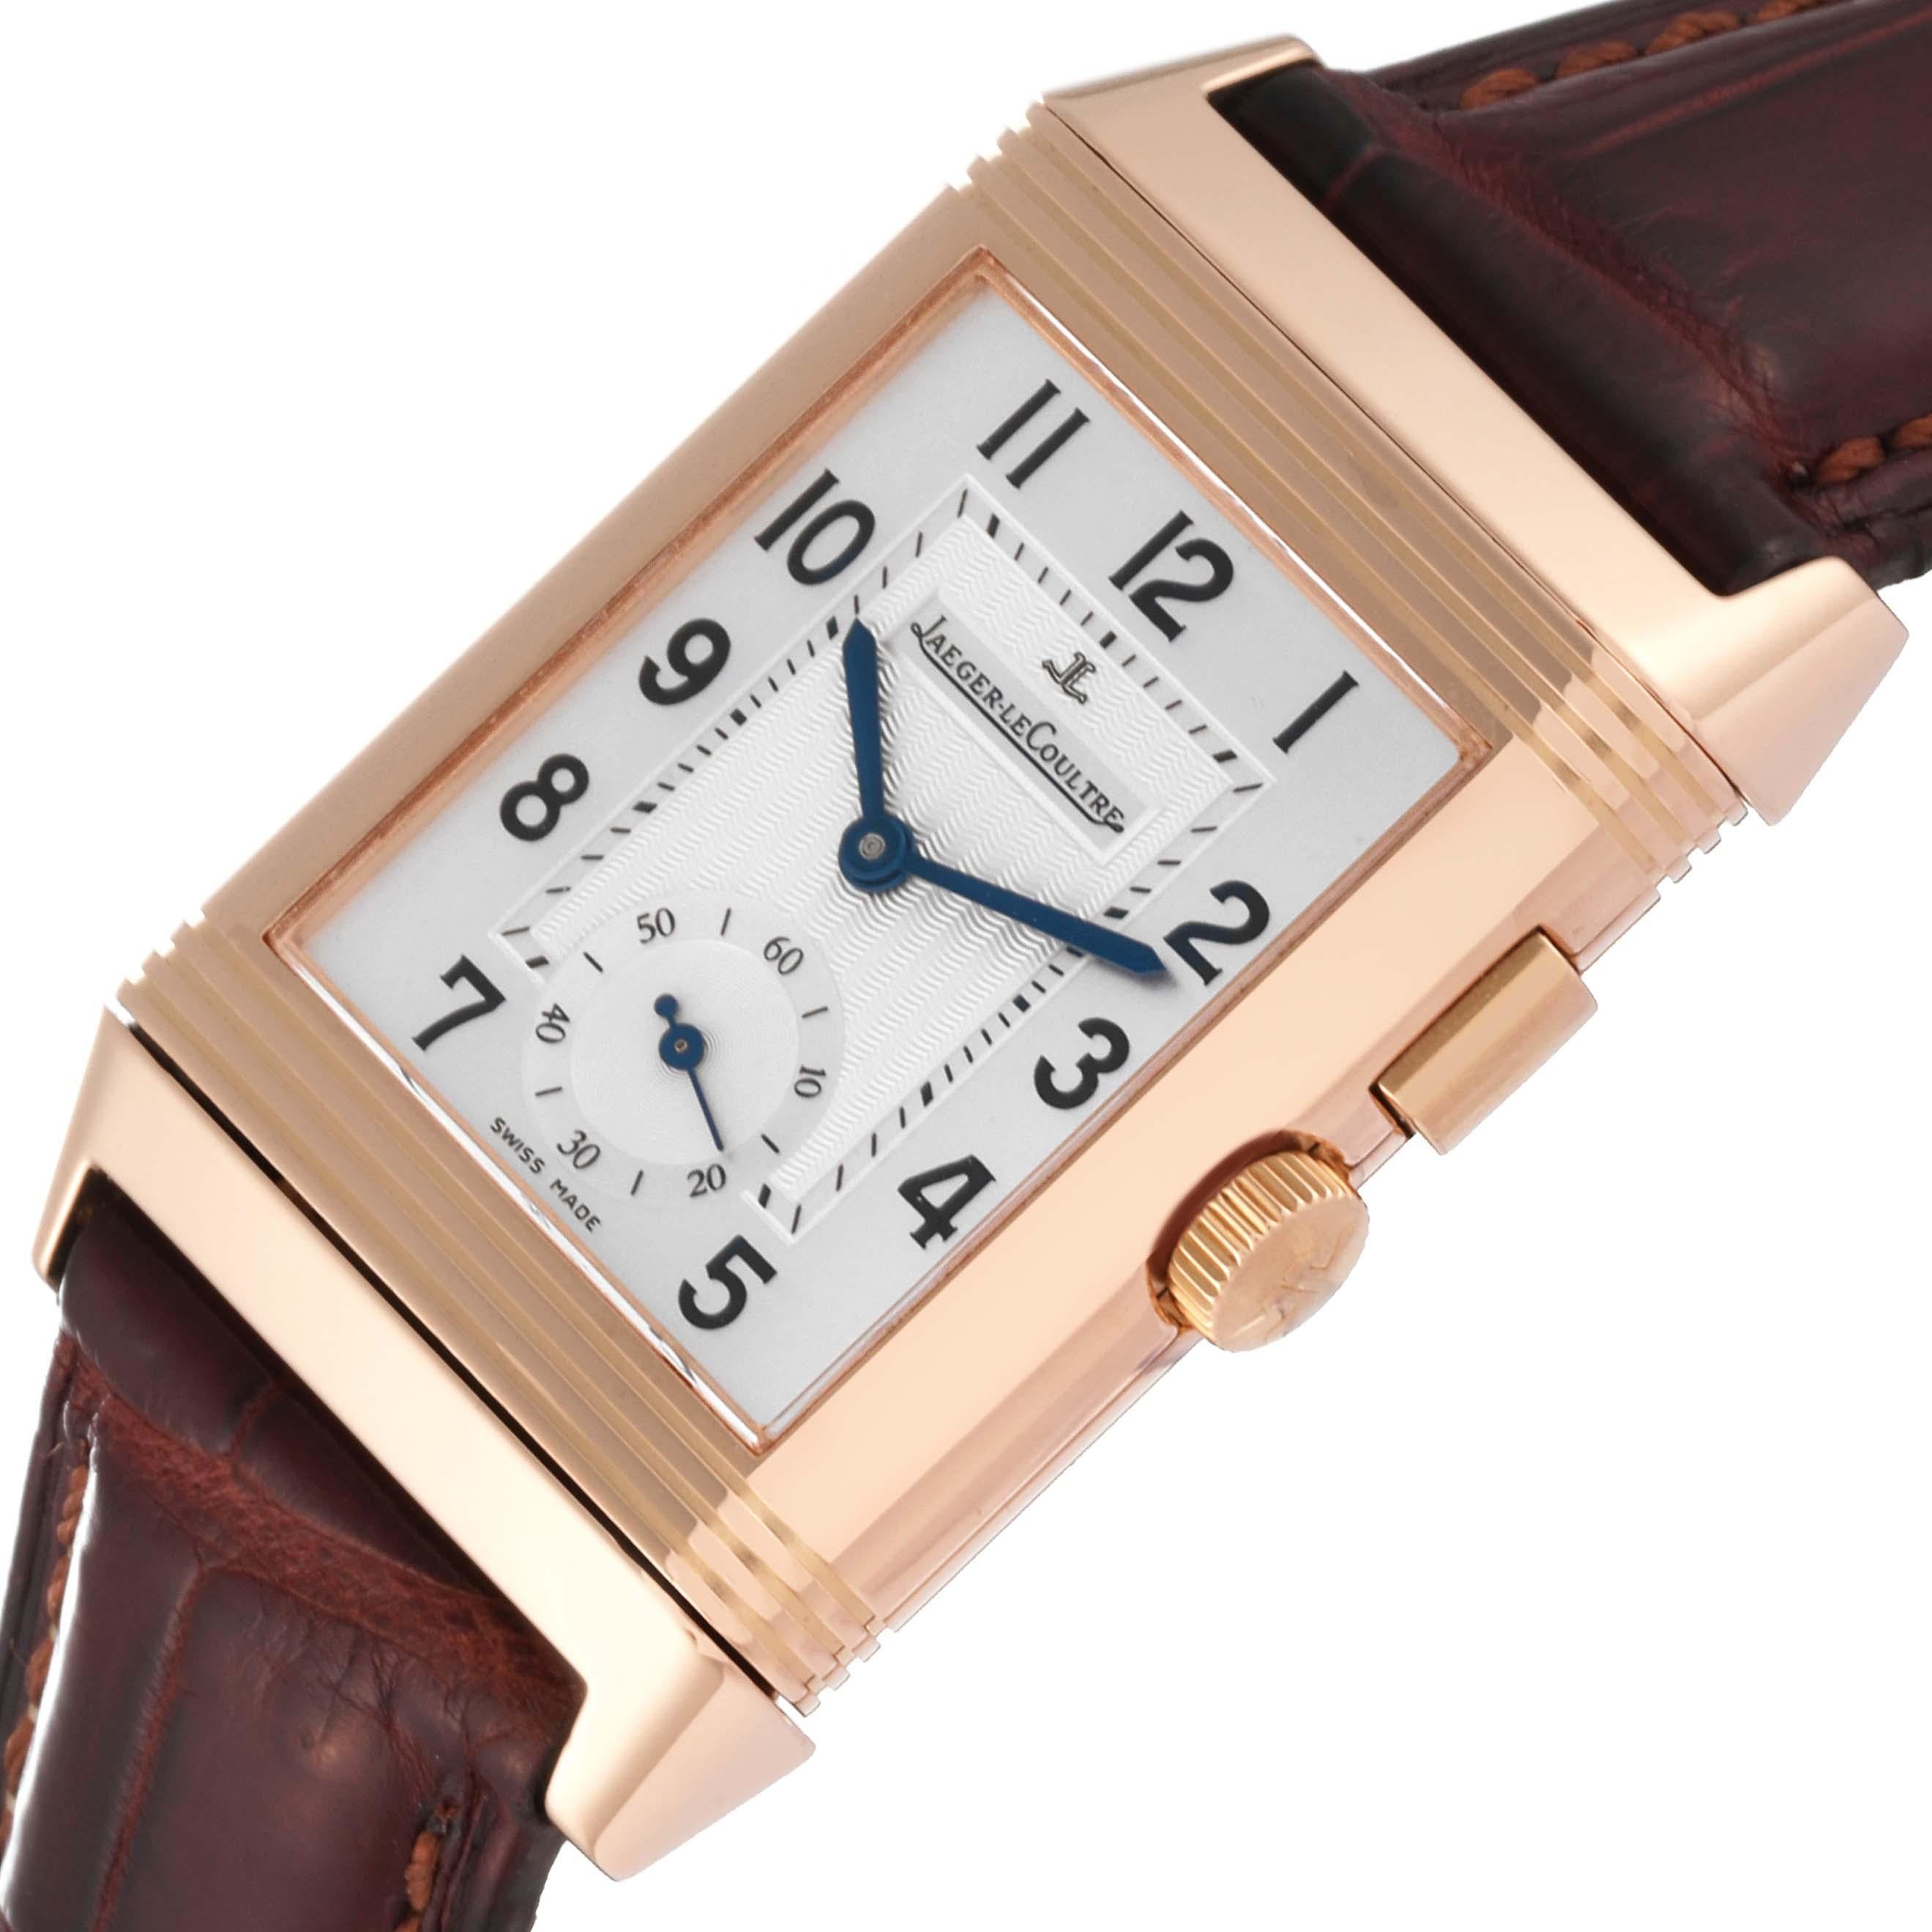 Jaeger LeCoultre Reverso Duoface Rose Gold Mens Watch 272.2.54 Q2712410 1